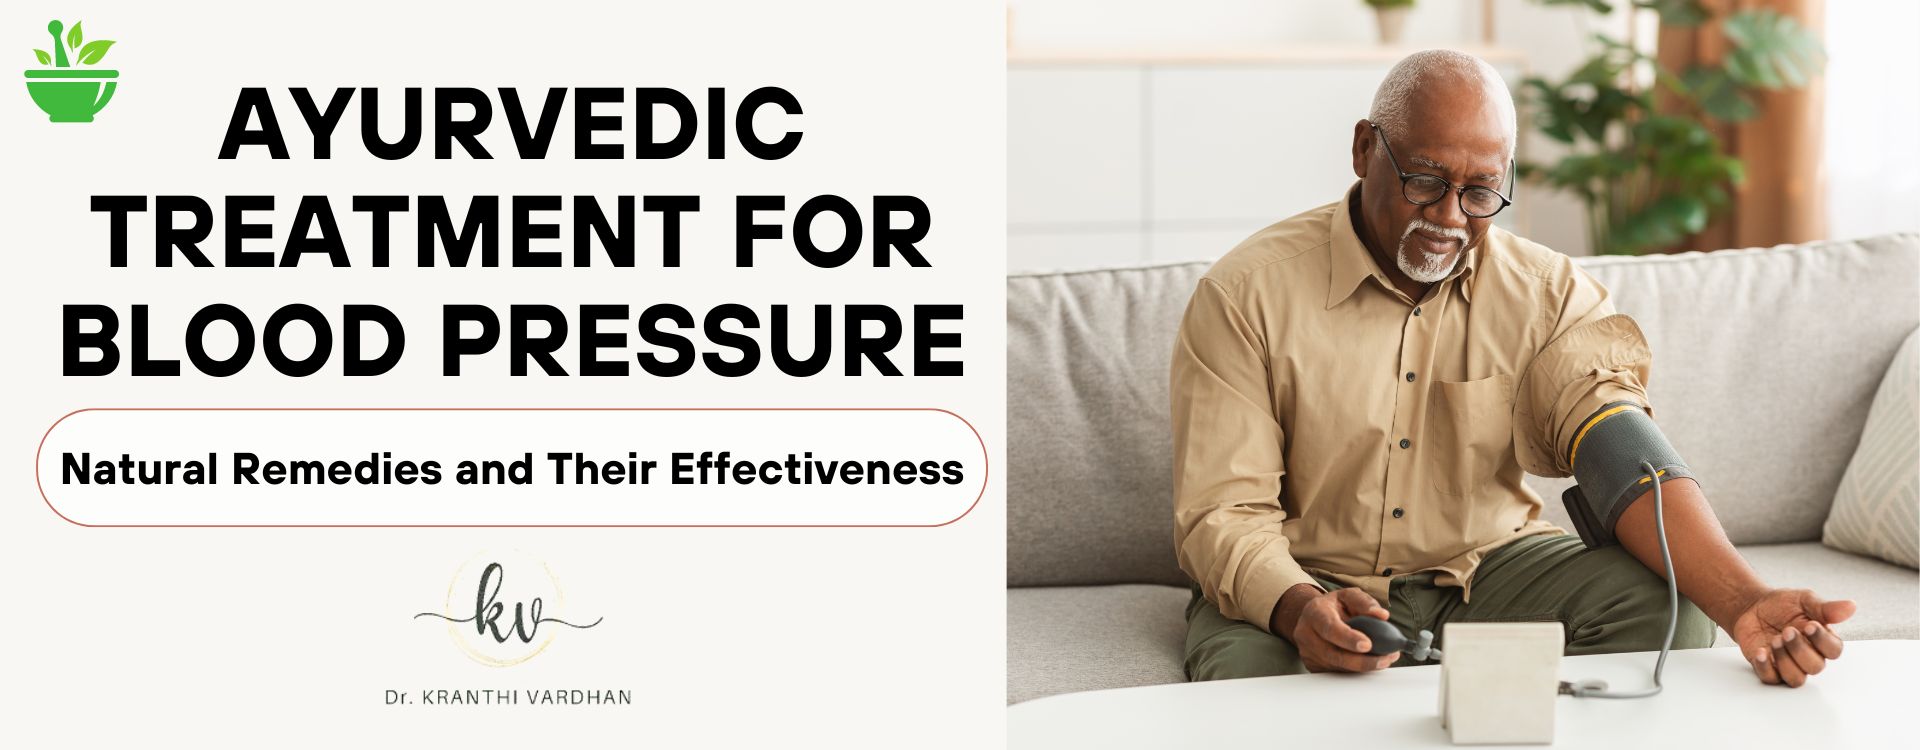 Ayurvedic Treatment for Blood Pressure: Natural Remedies and Their Effectiveness